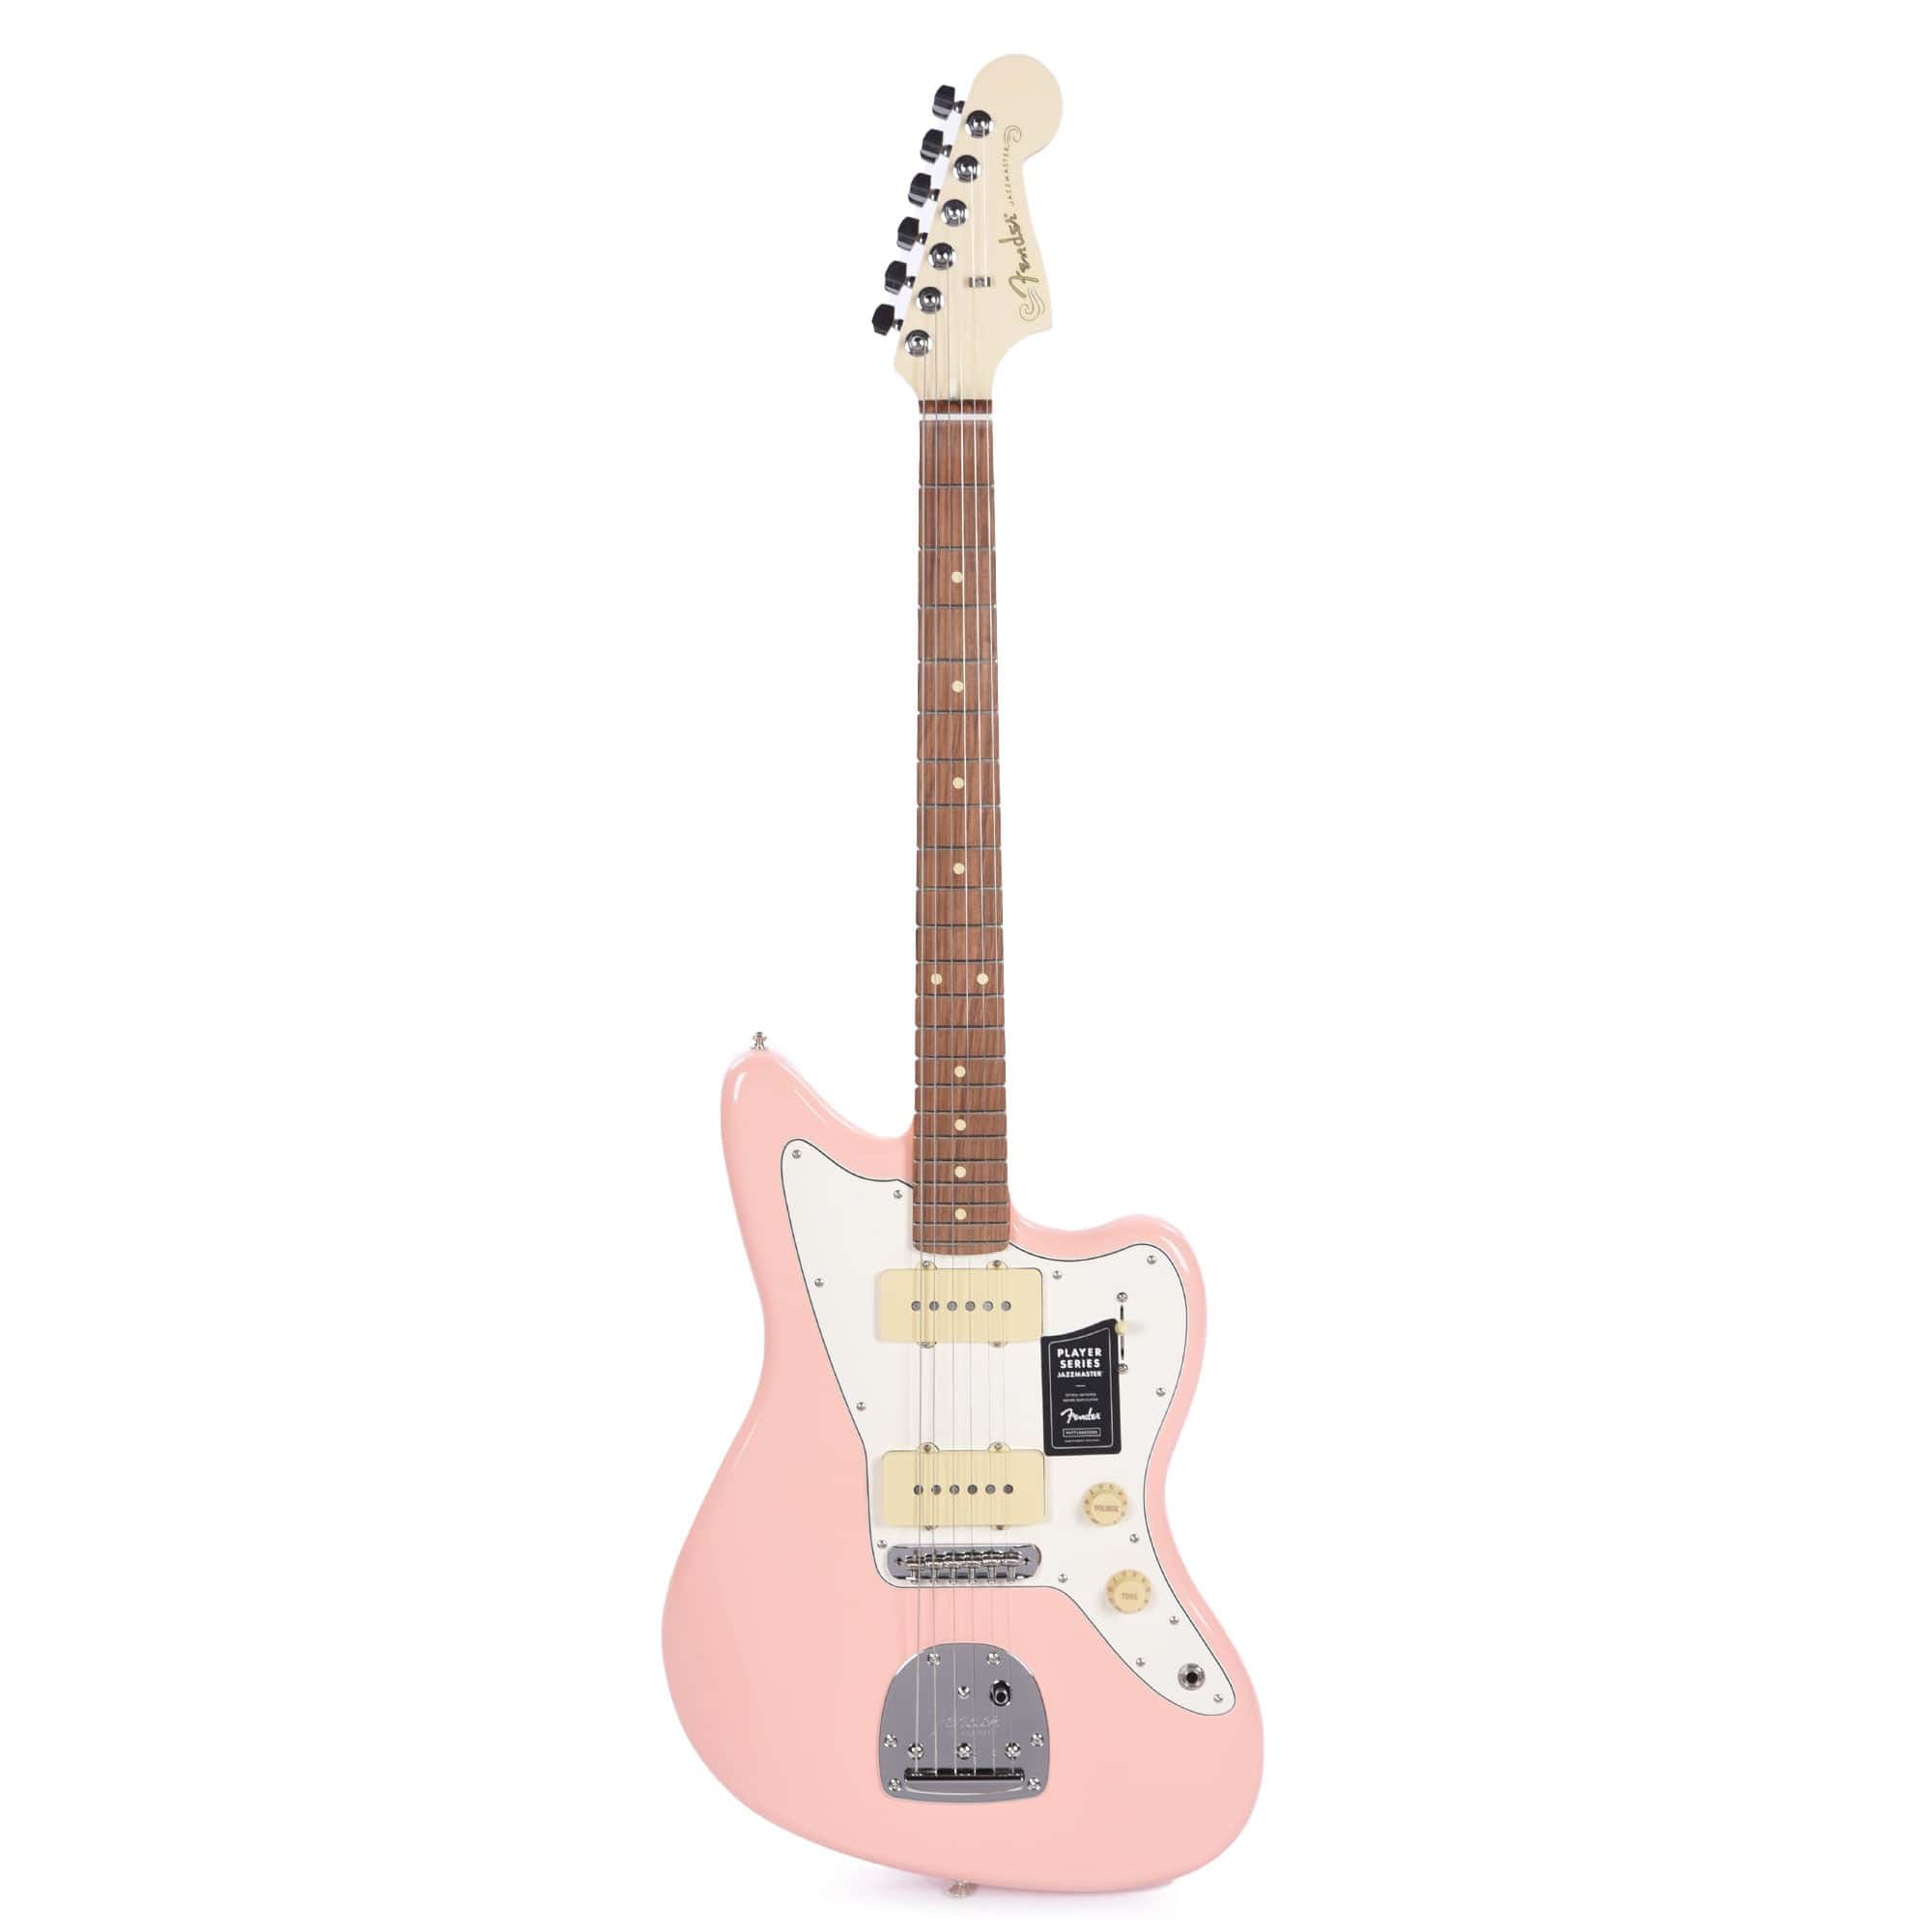 Fender Player Jazzmaster Shell Pink w/Olympic White Headcap, Pure Vintage '65 Pickups, & Series/Parallel 4-Way Electric Guitars / Solid Body